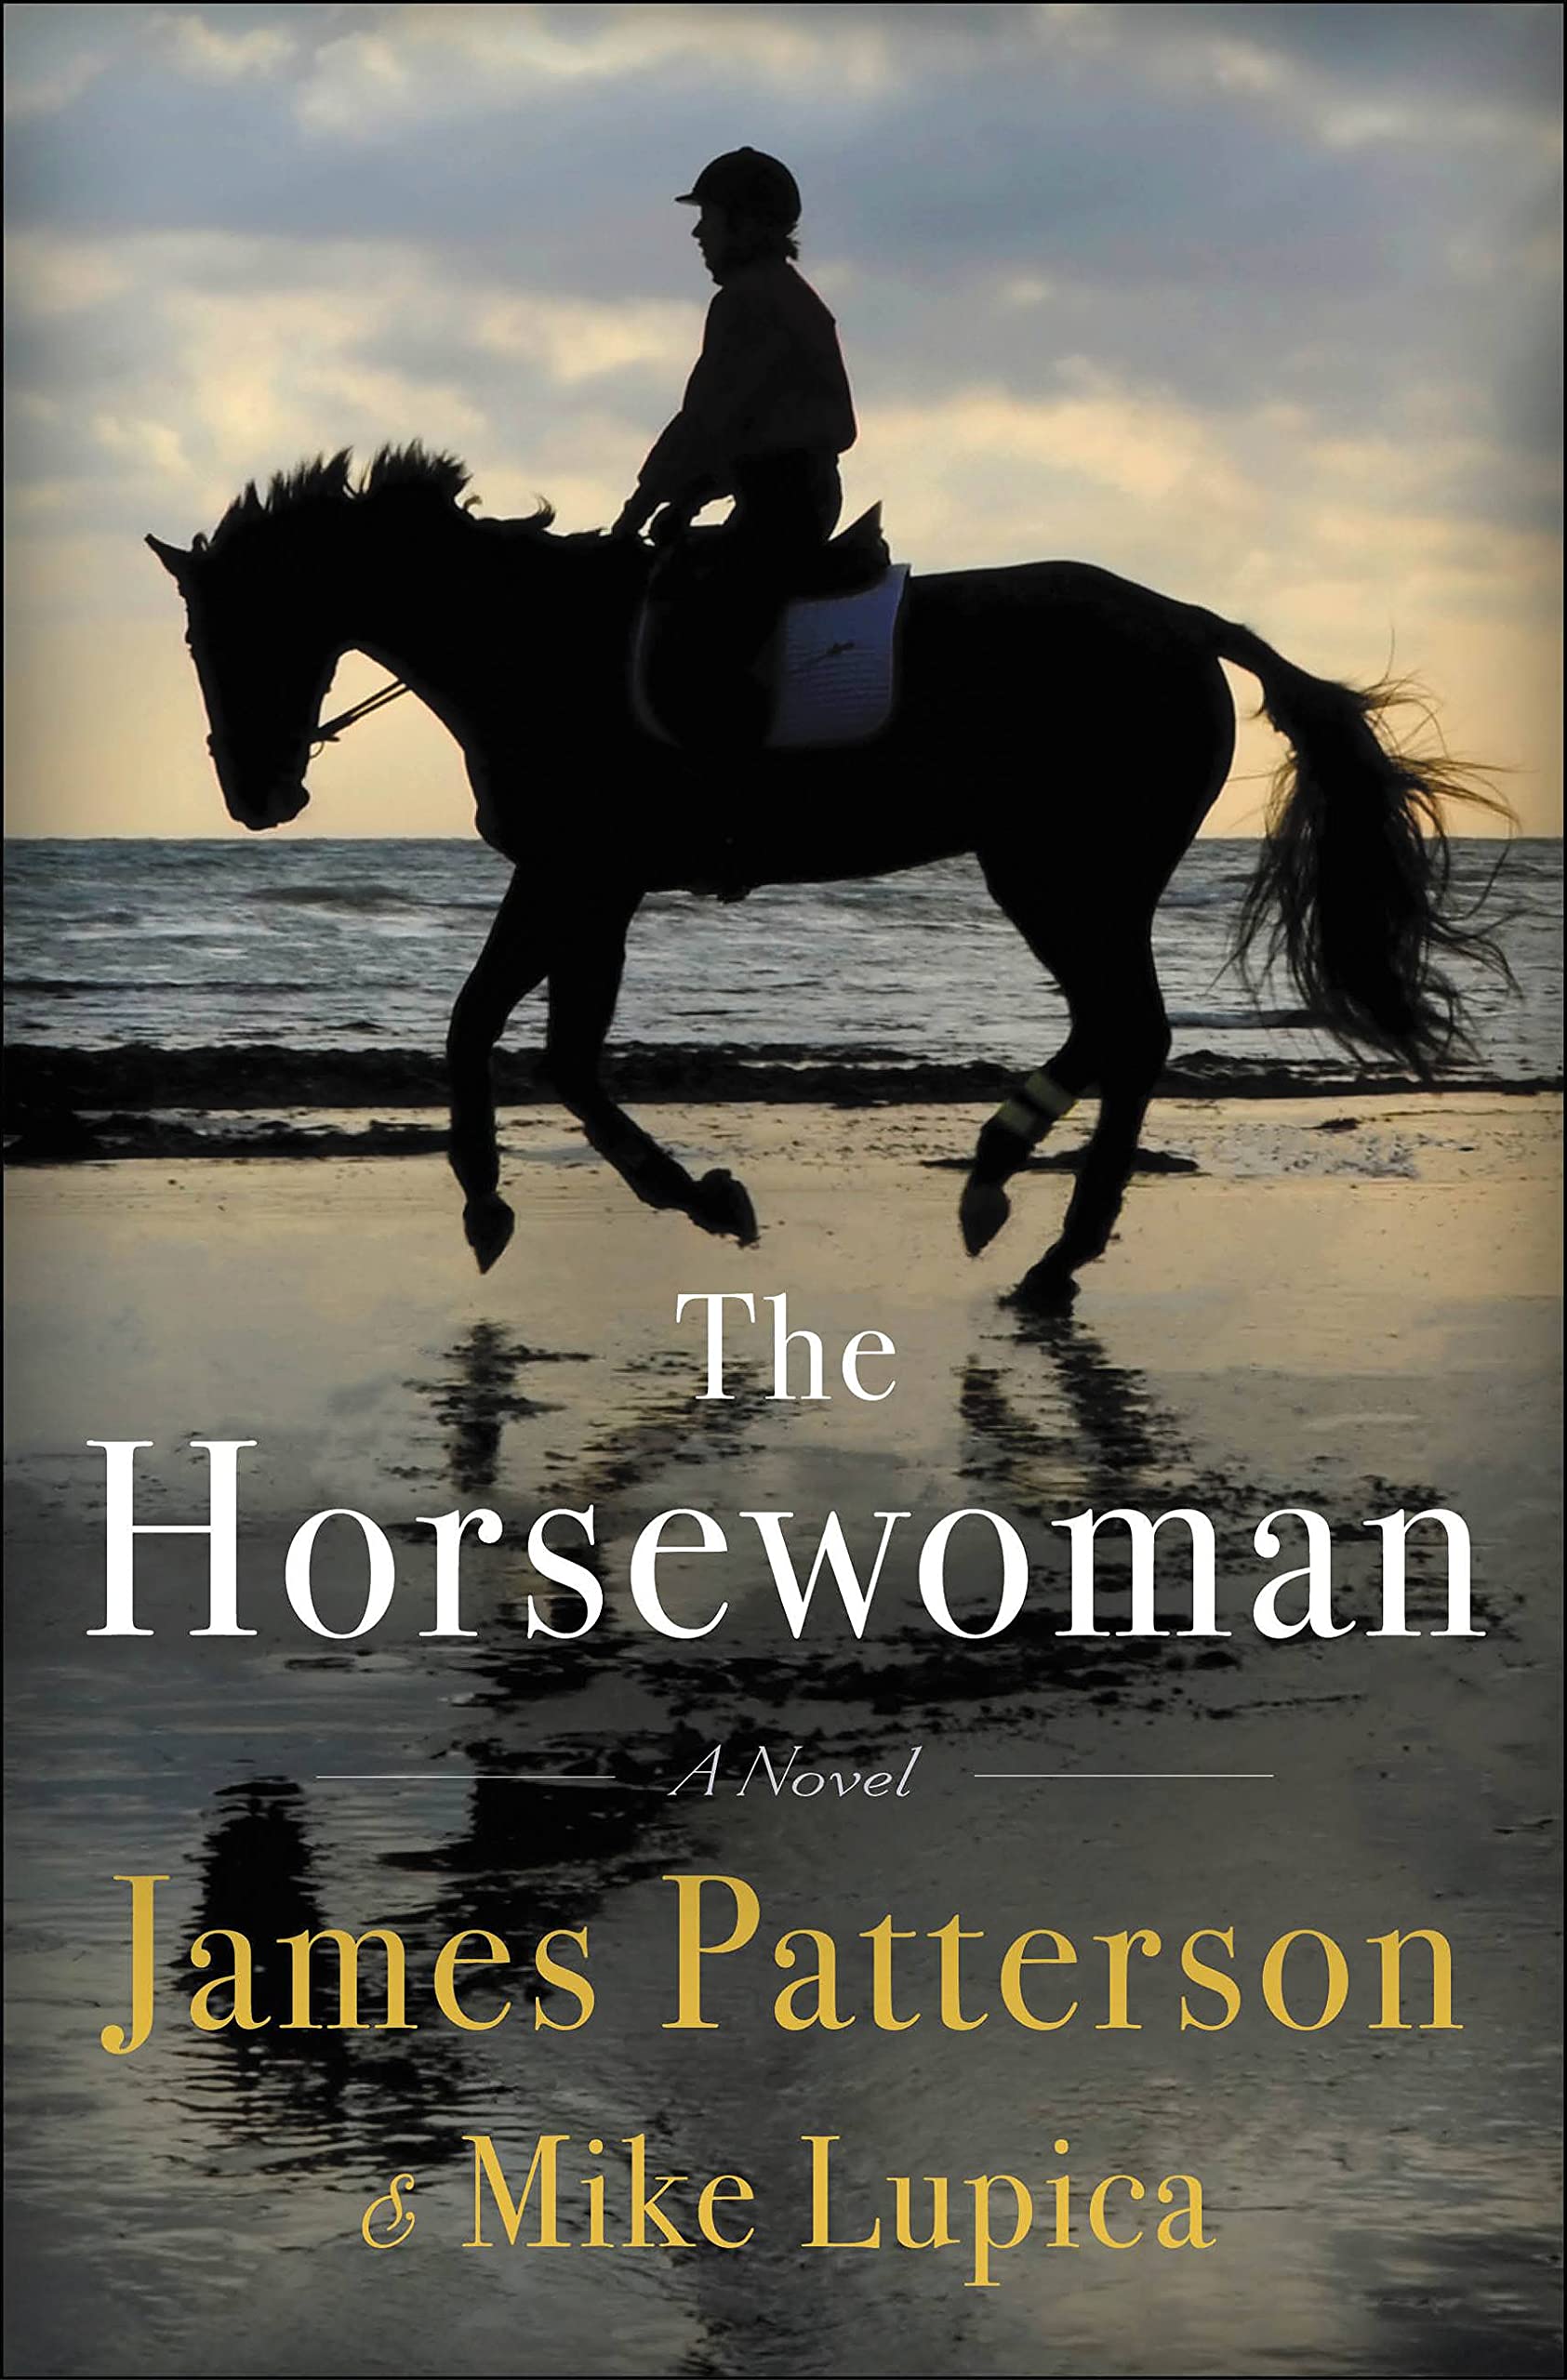 The Horsewoman by james patterson